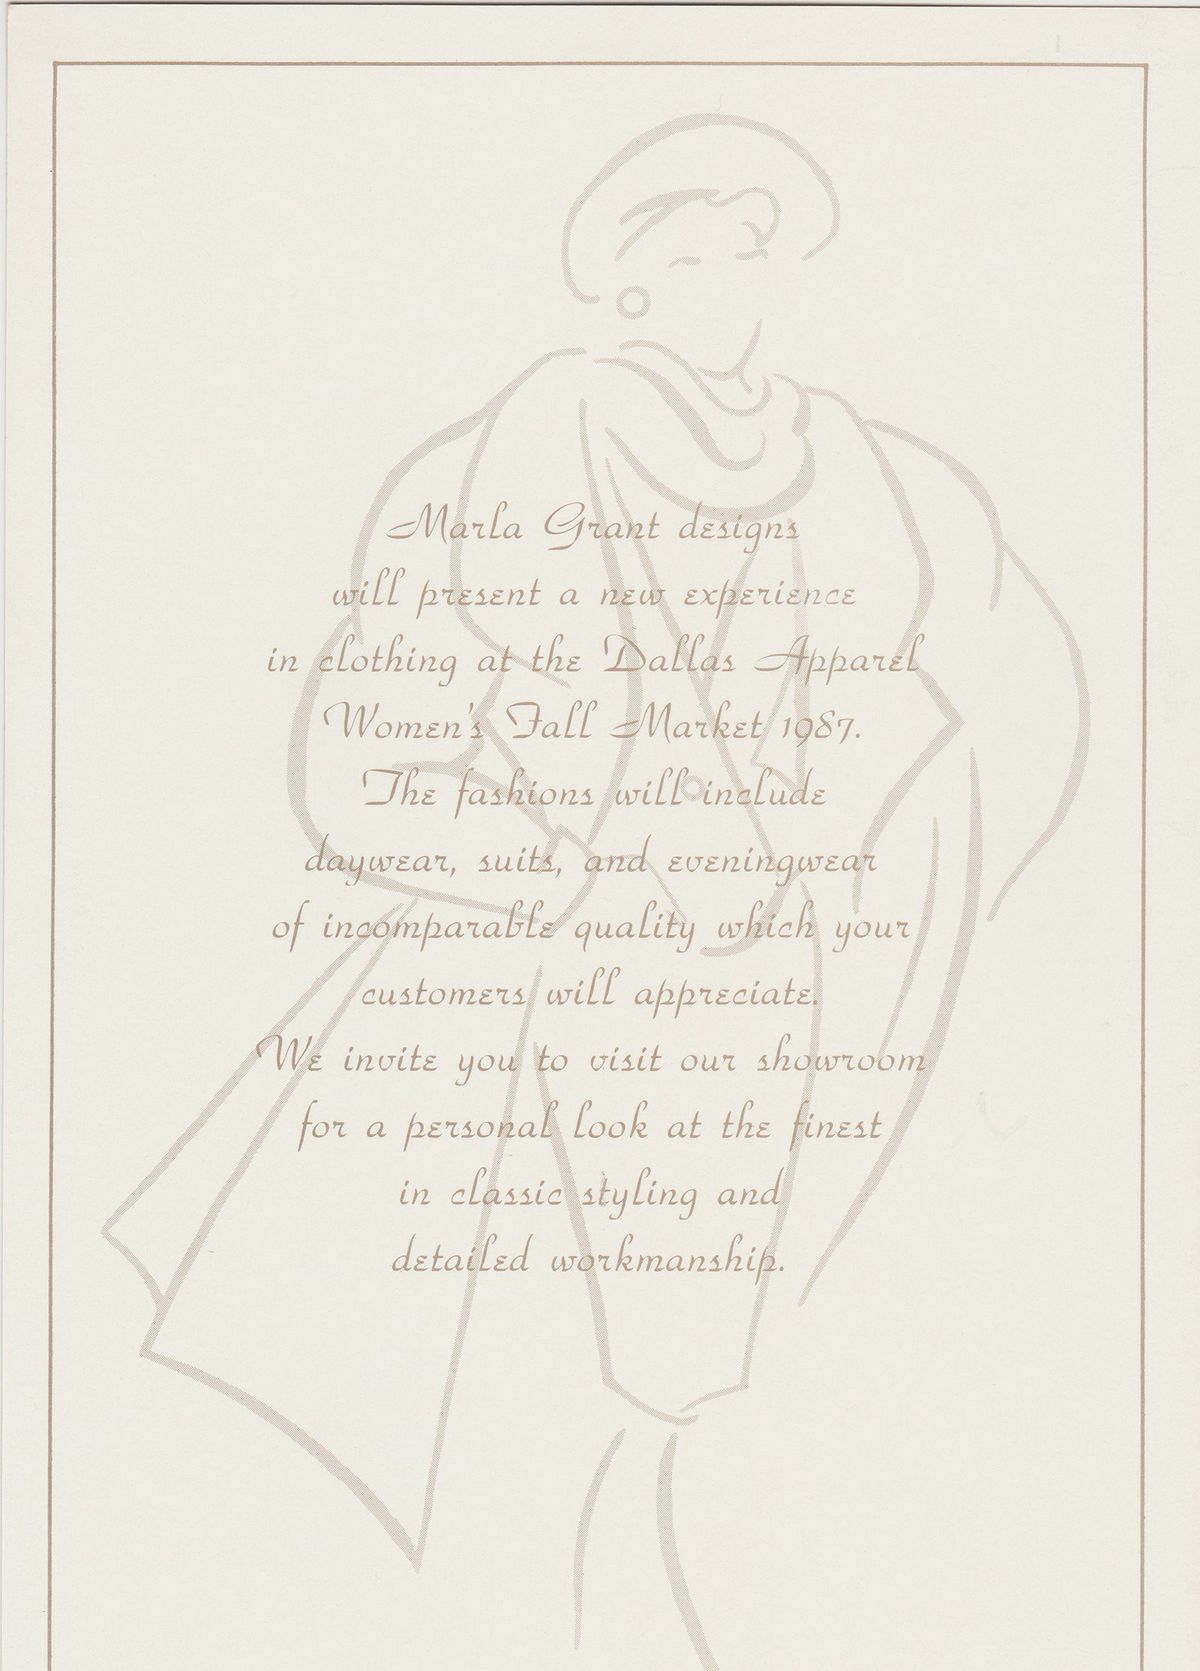 A line drawing of a woman in the background of an invitation.